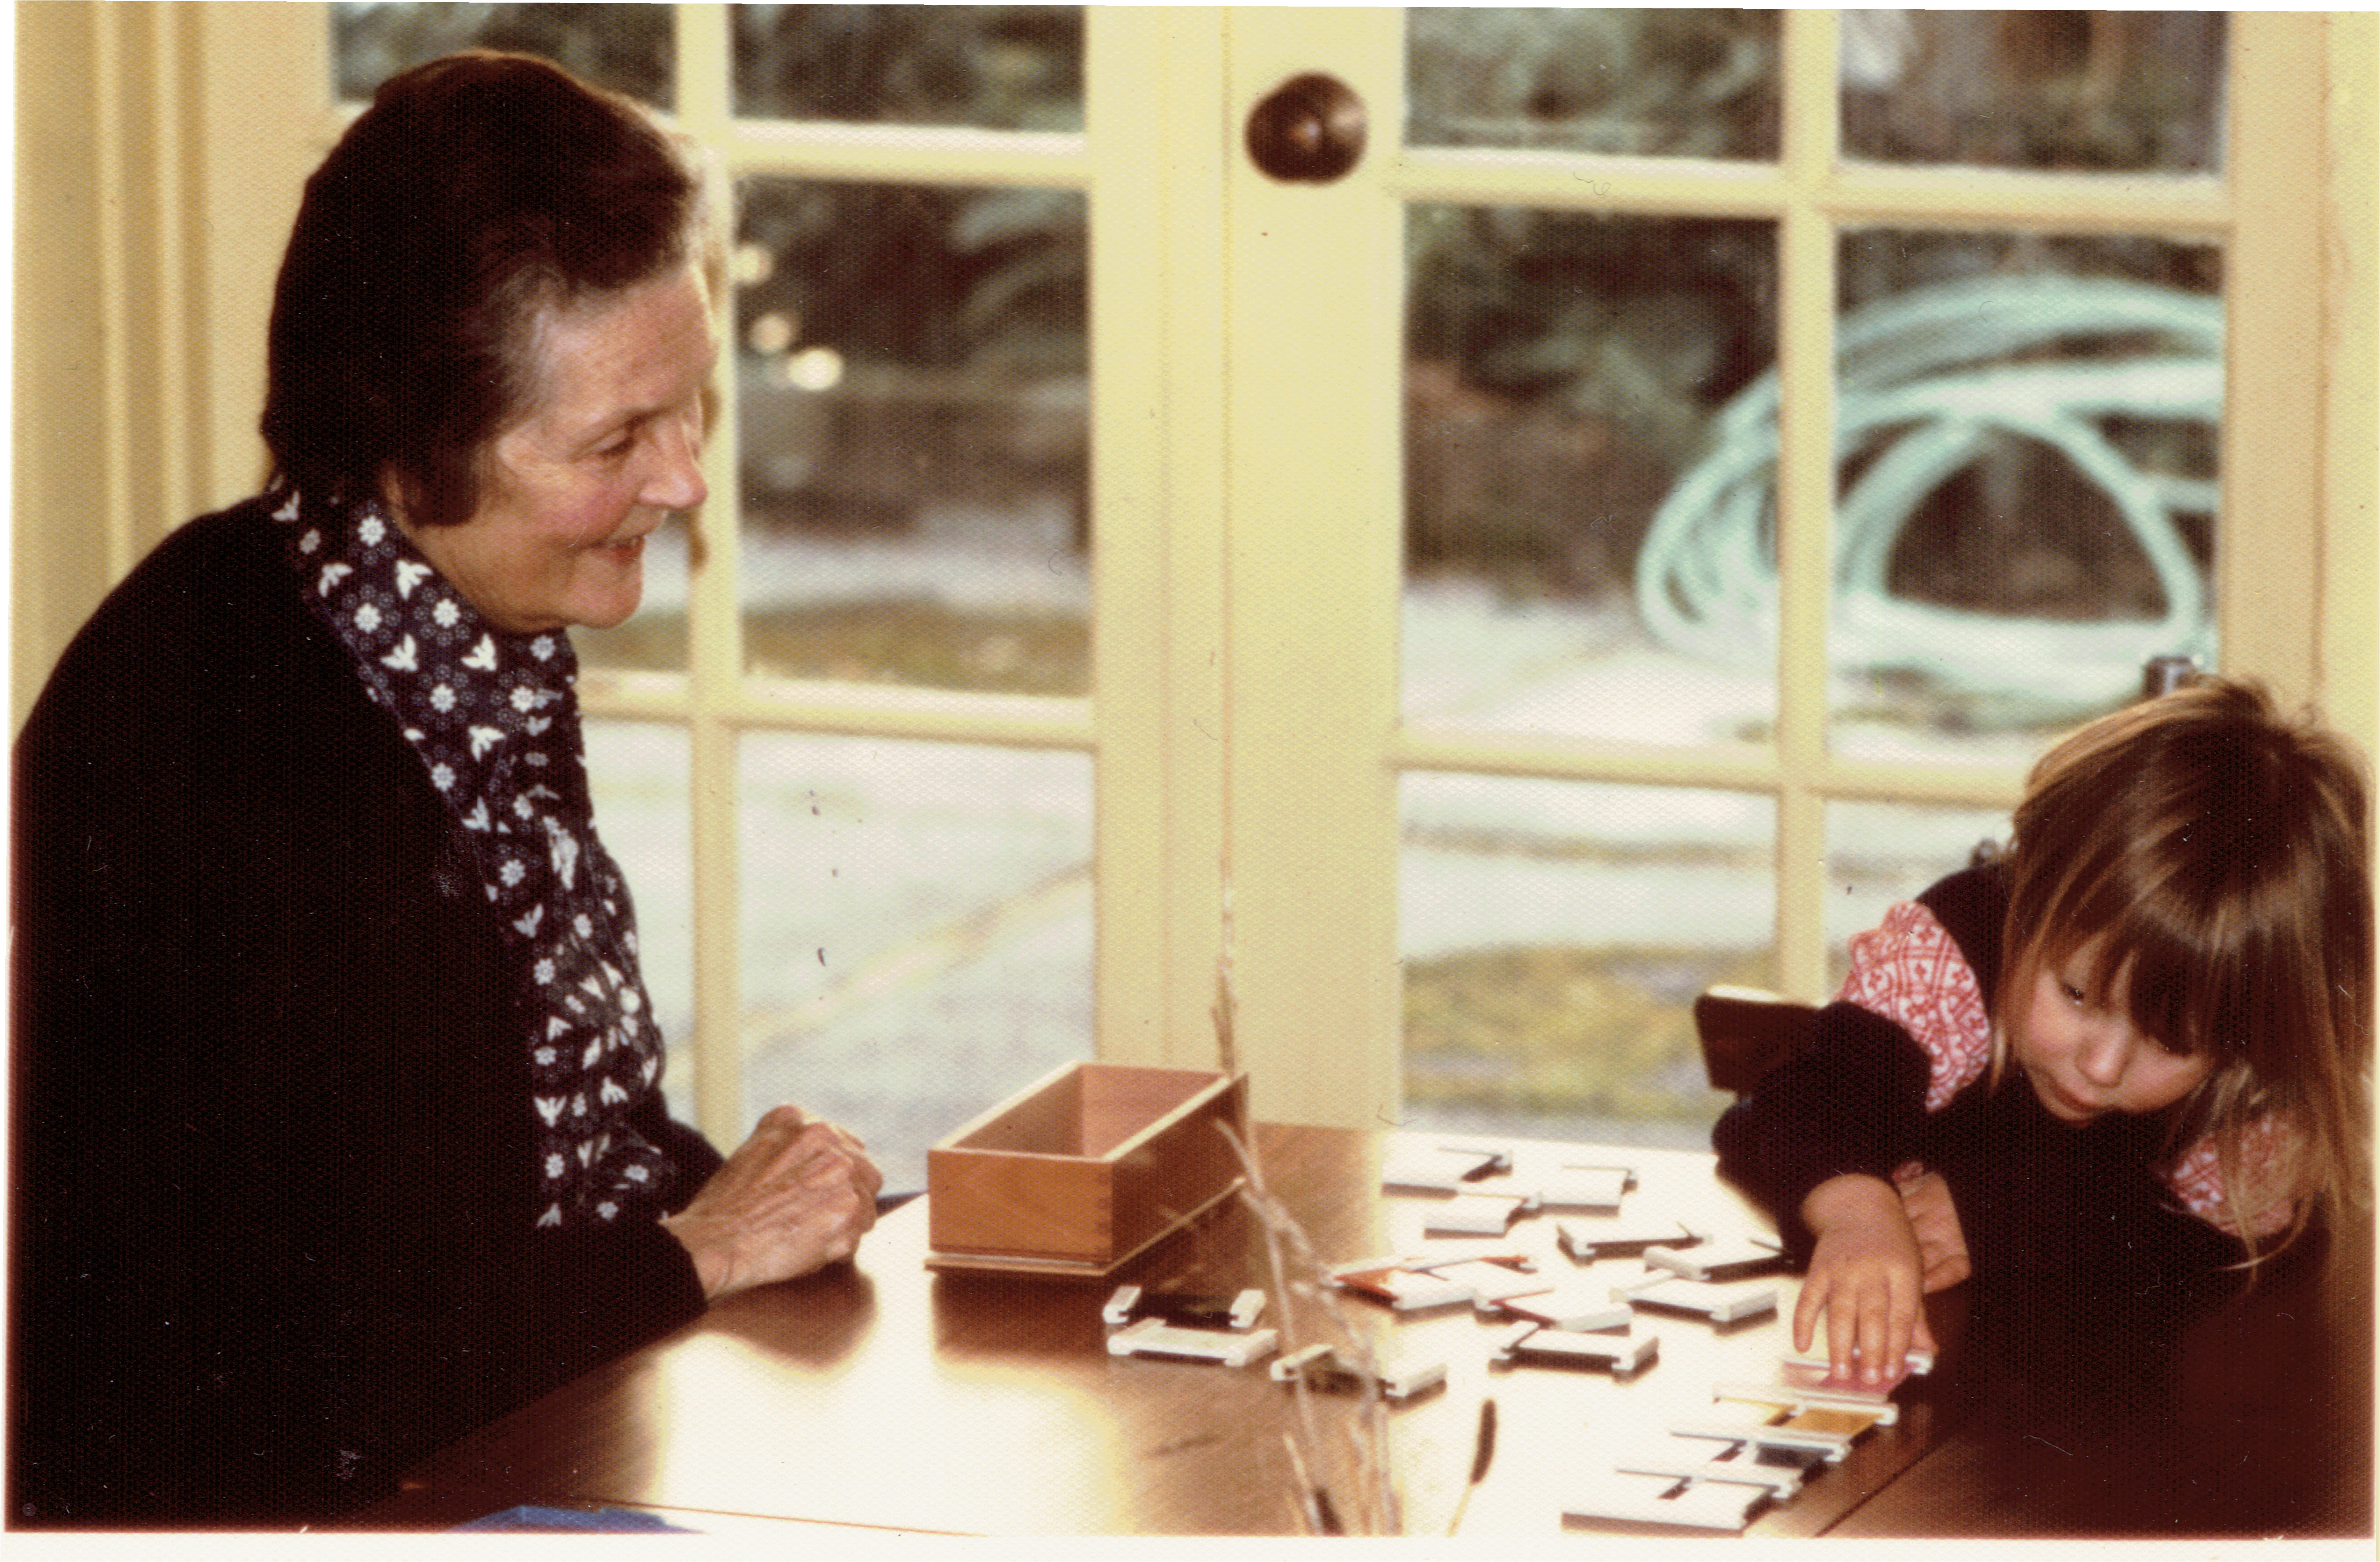 Dorothy King, Founder of Montessori Country School